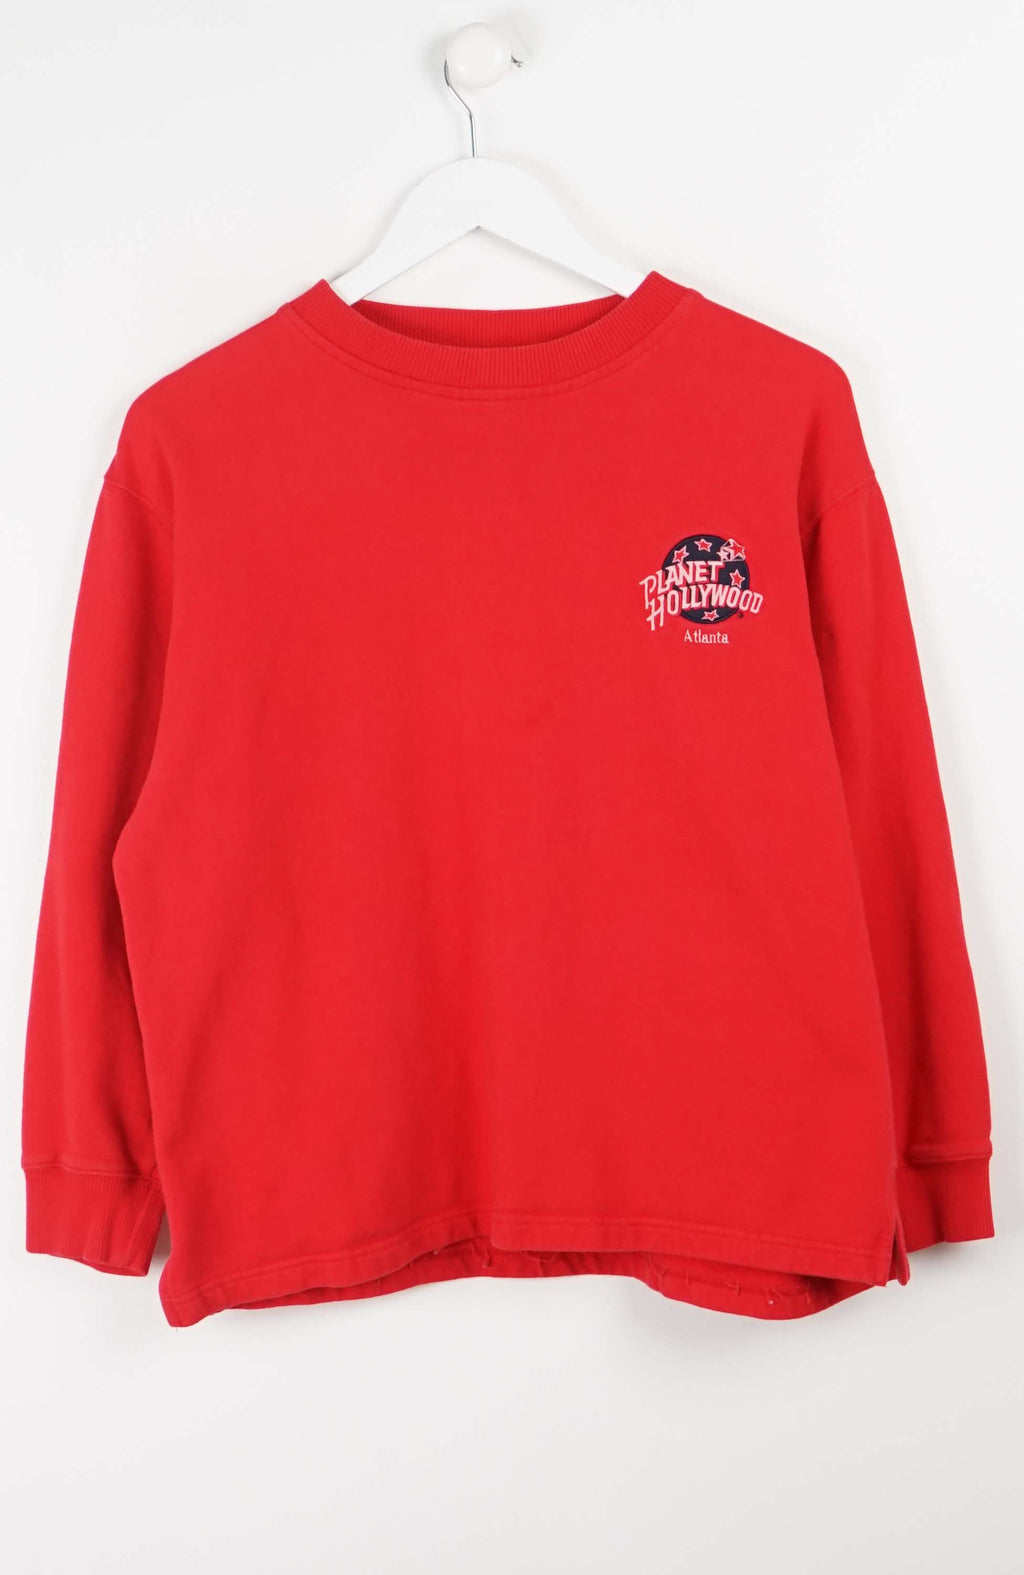 VINTAGE PLANET HOLLYWOOD SWEATER (S)